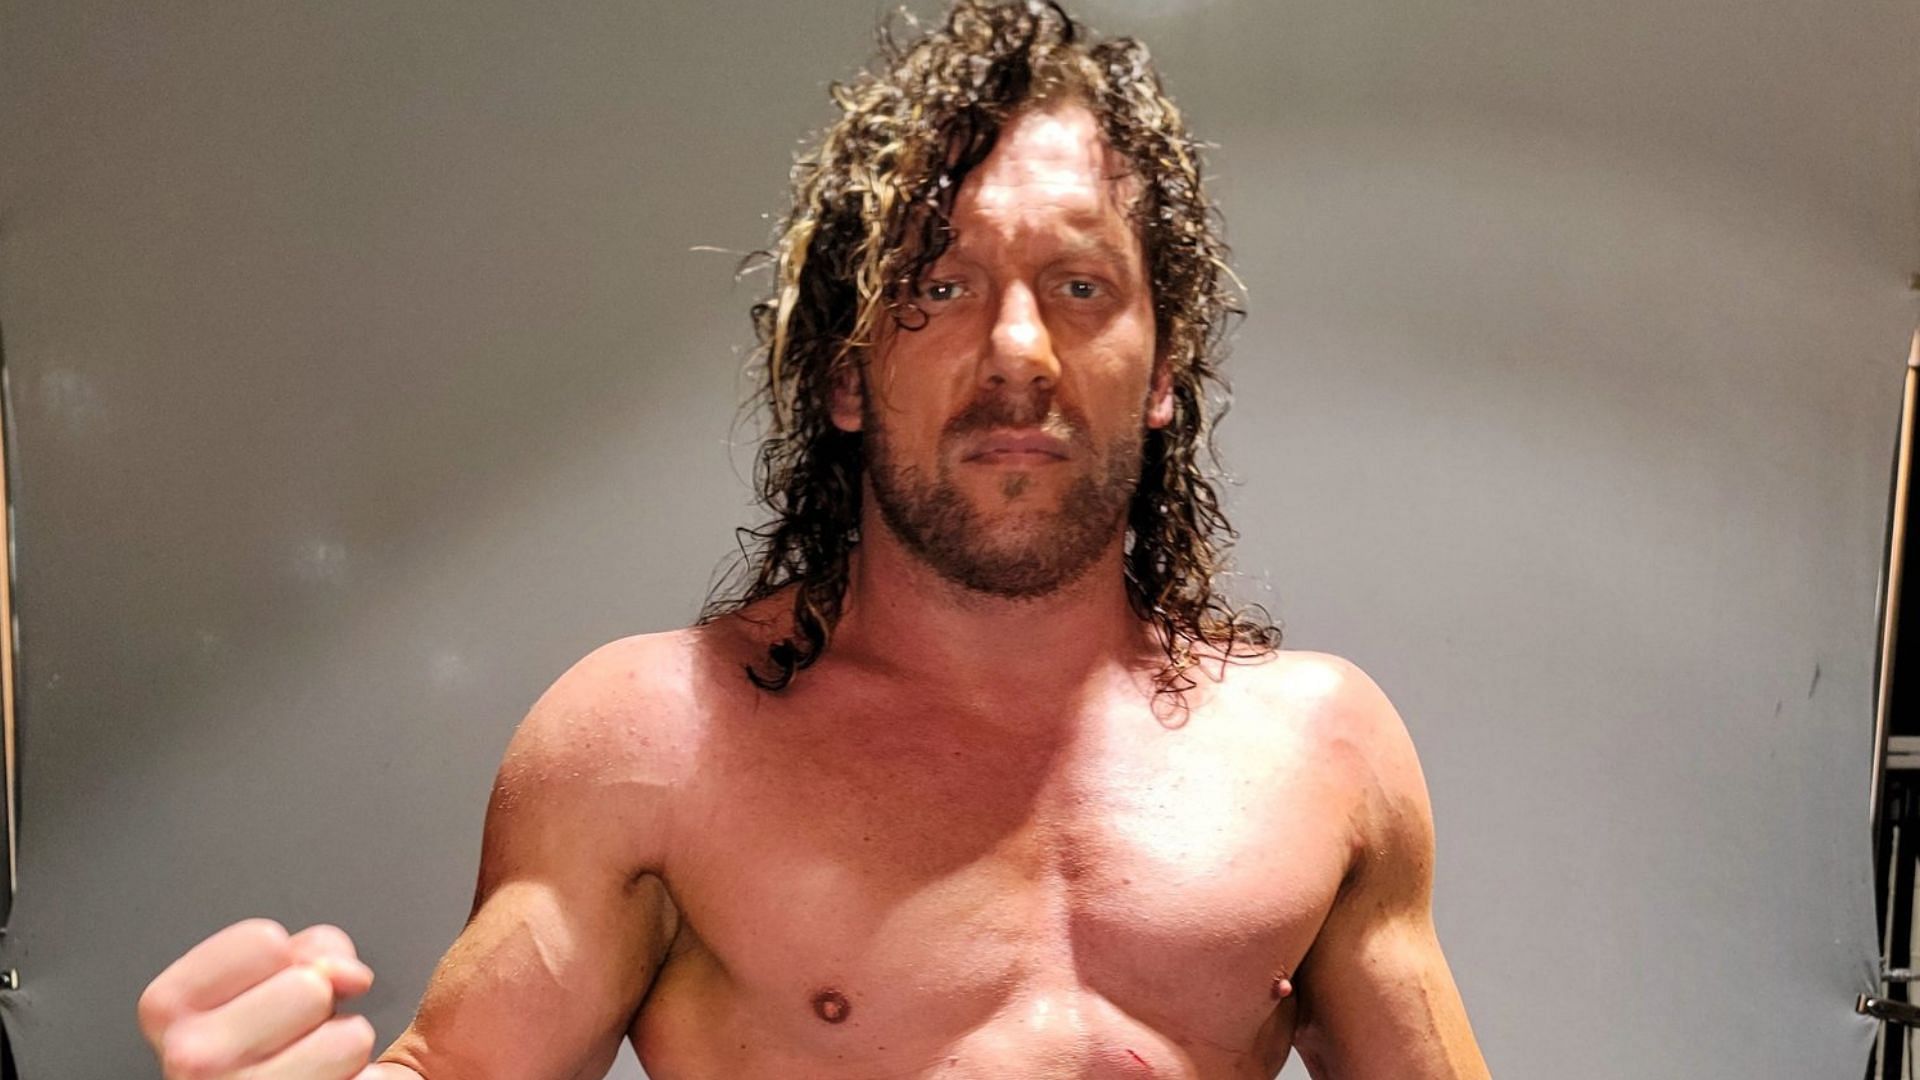 Omega is an AEW original and the third world champion of the promotion